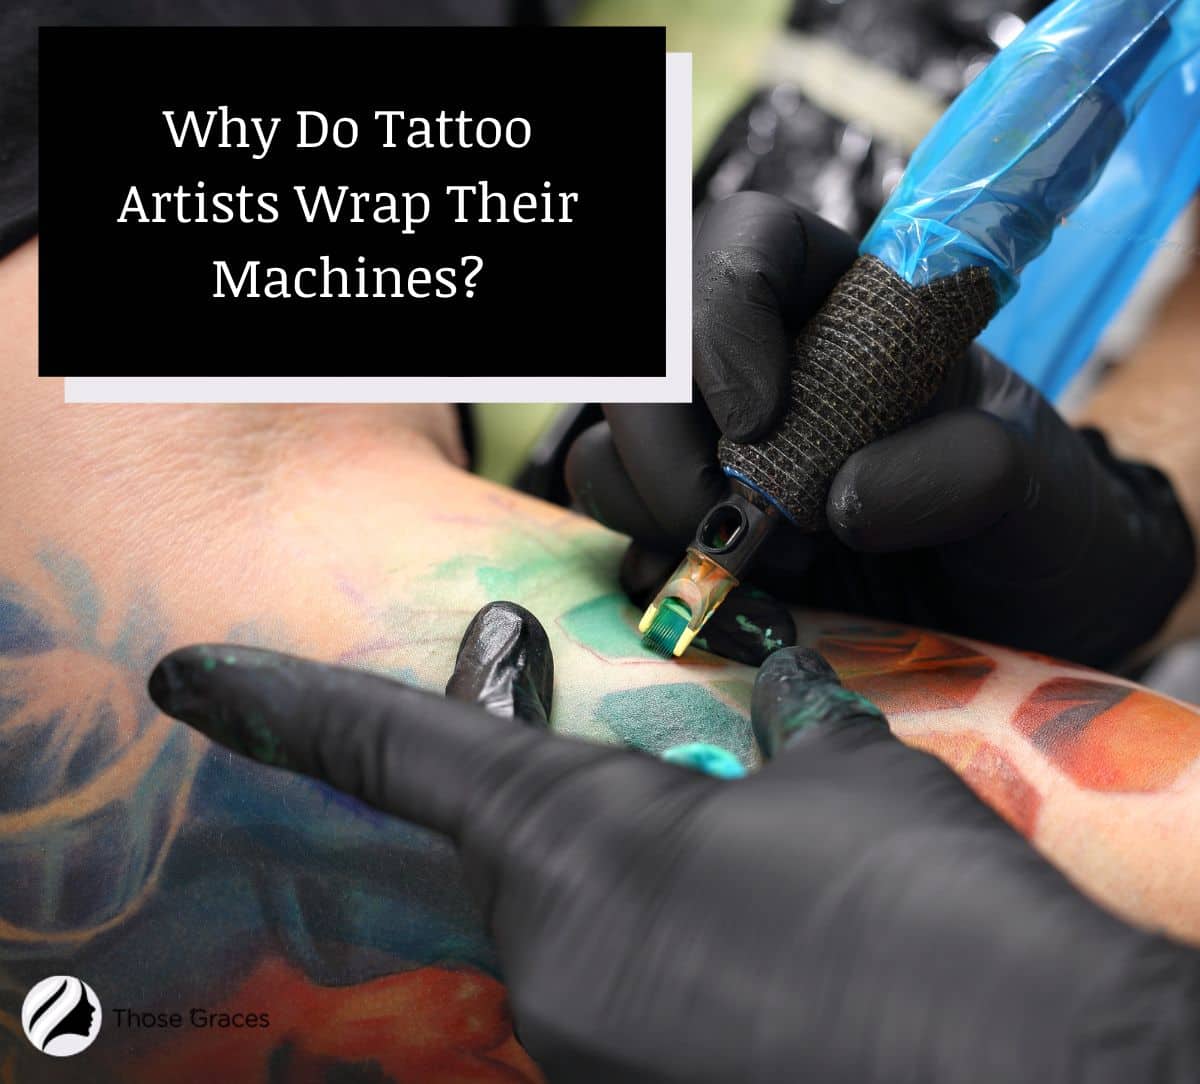 tattoo artist holding a pen wrapped with a cloth and plastic but why do tattoo artists wrap their machines?